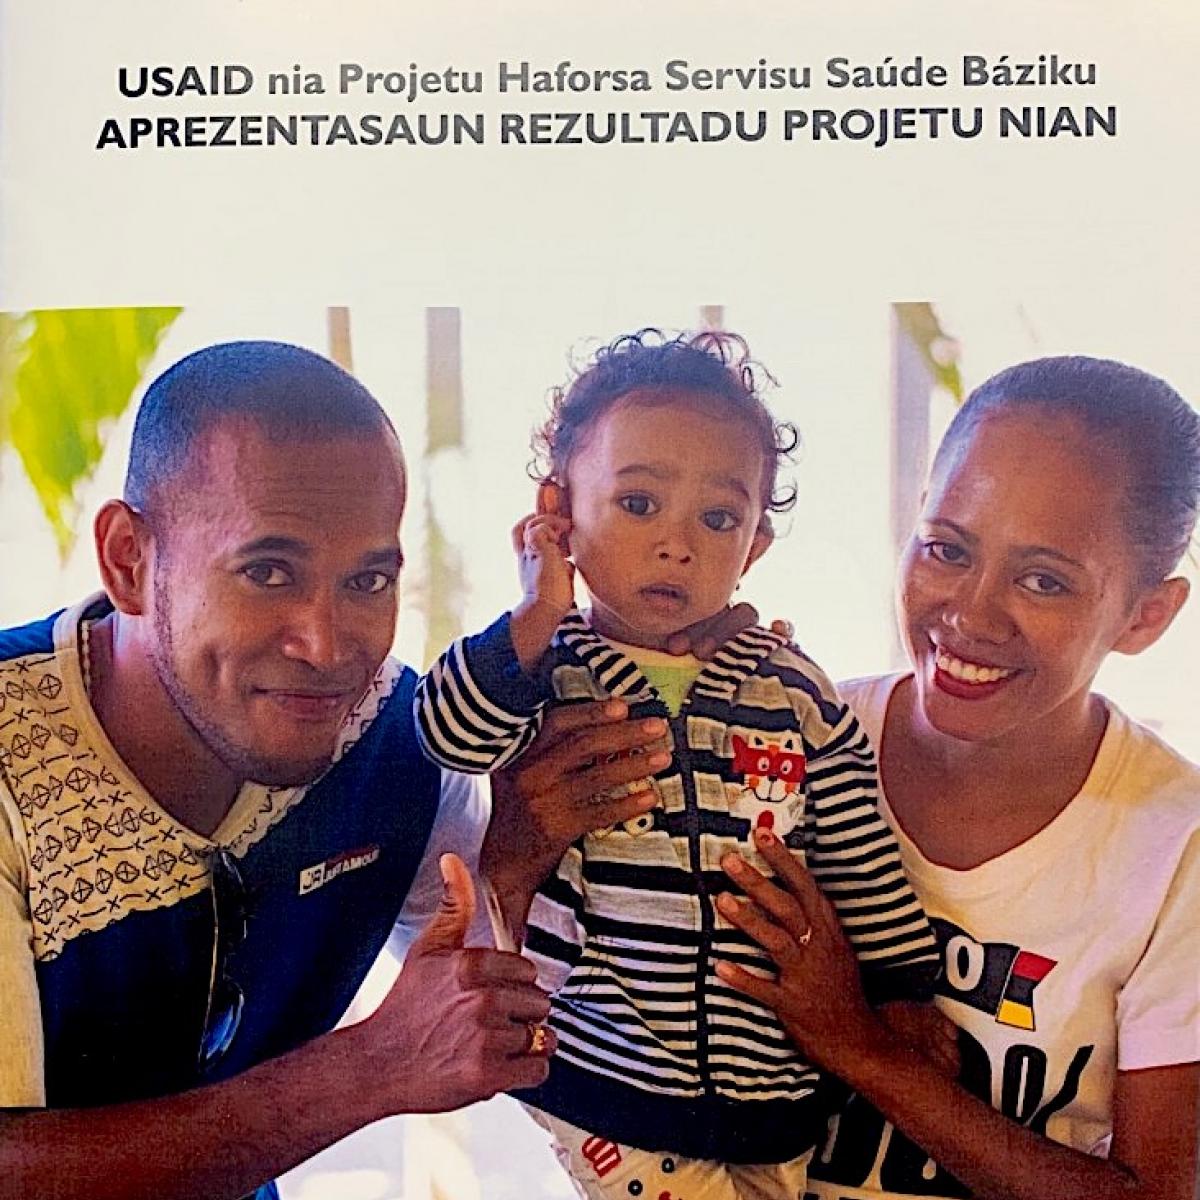 Results of USAID’s Reinforce Basic Health Services project (USAID’s Reinforce).